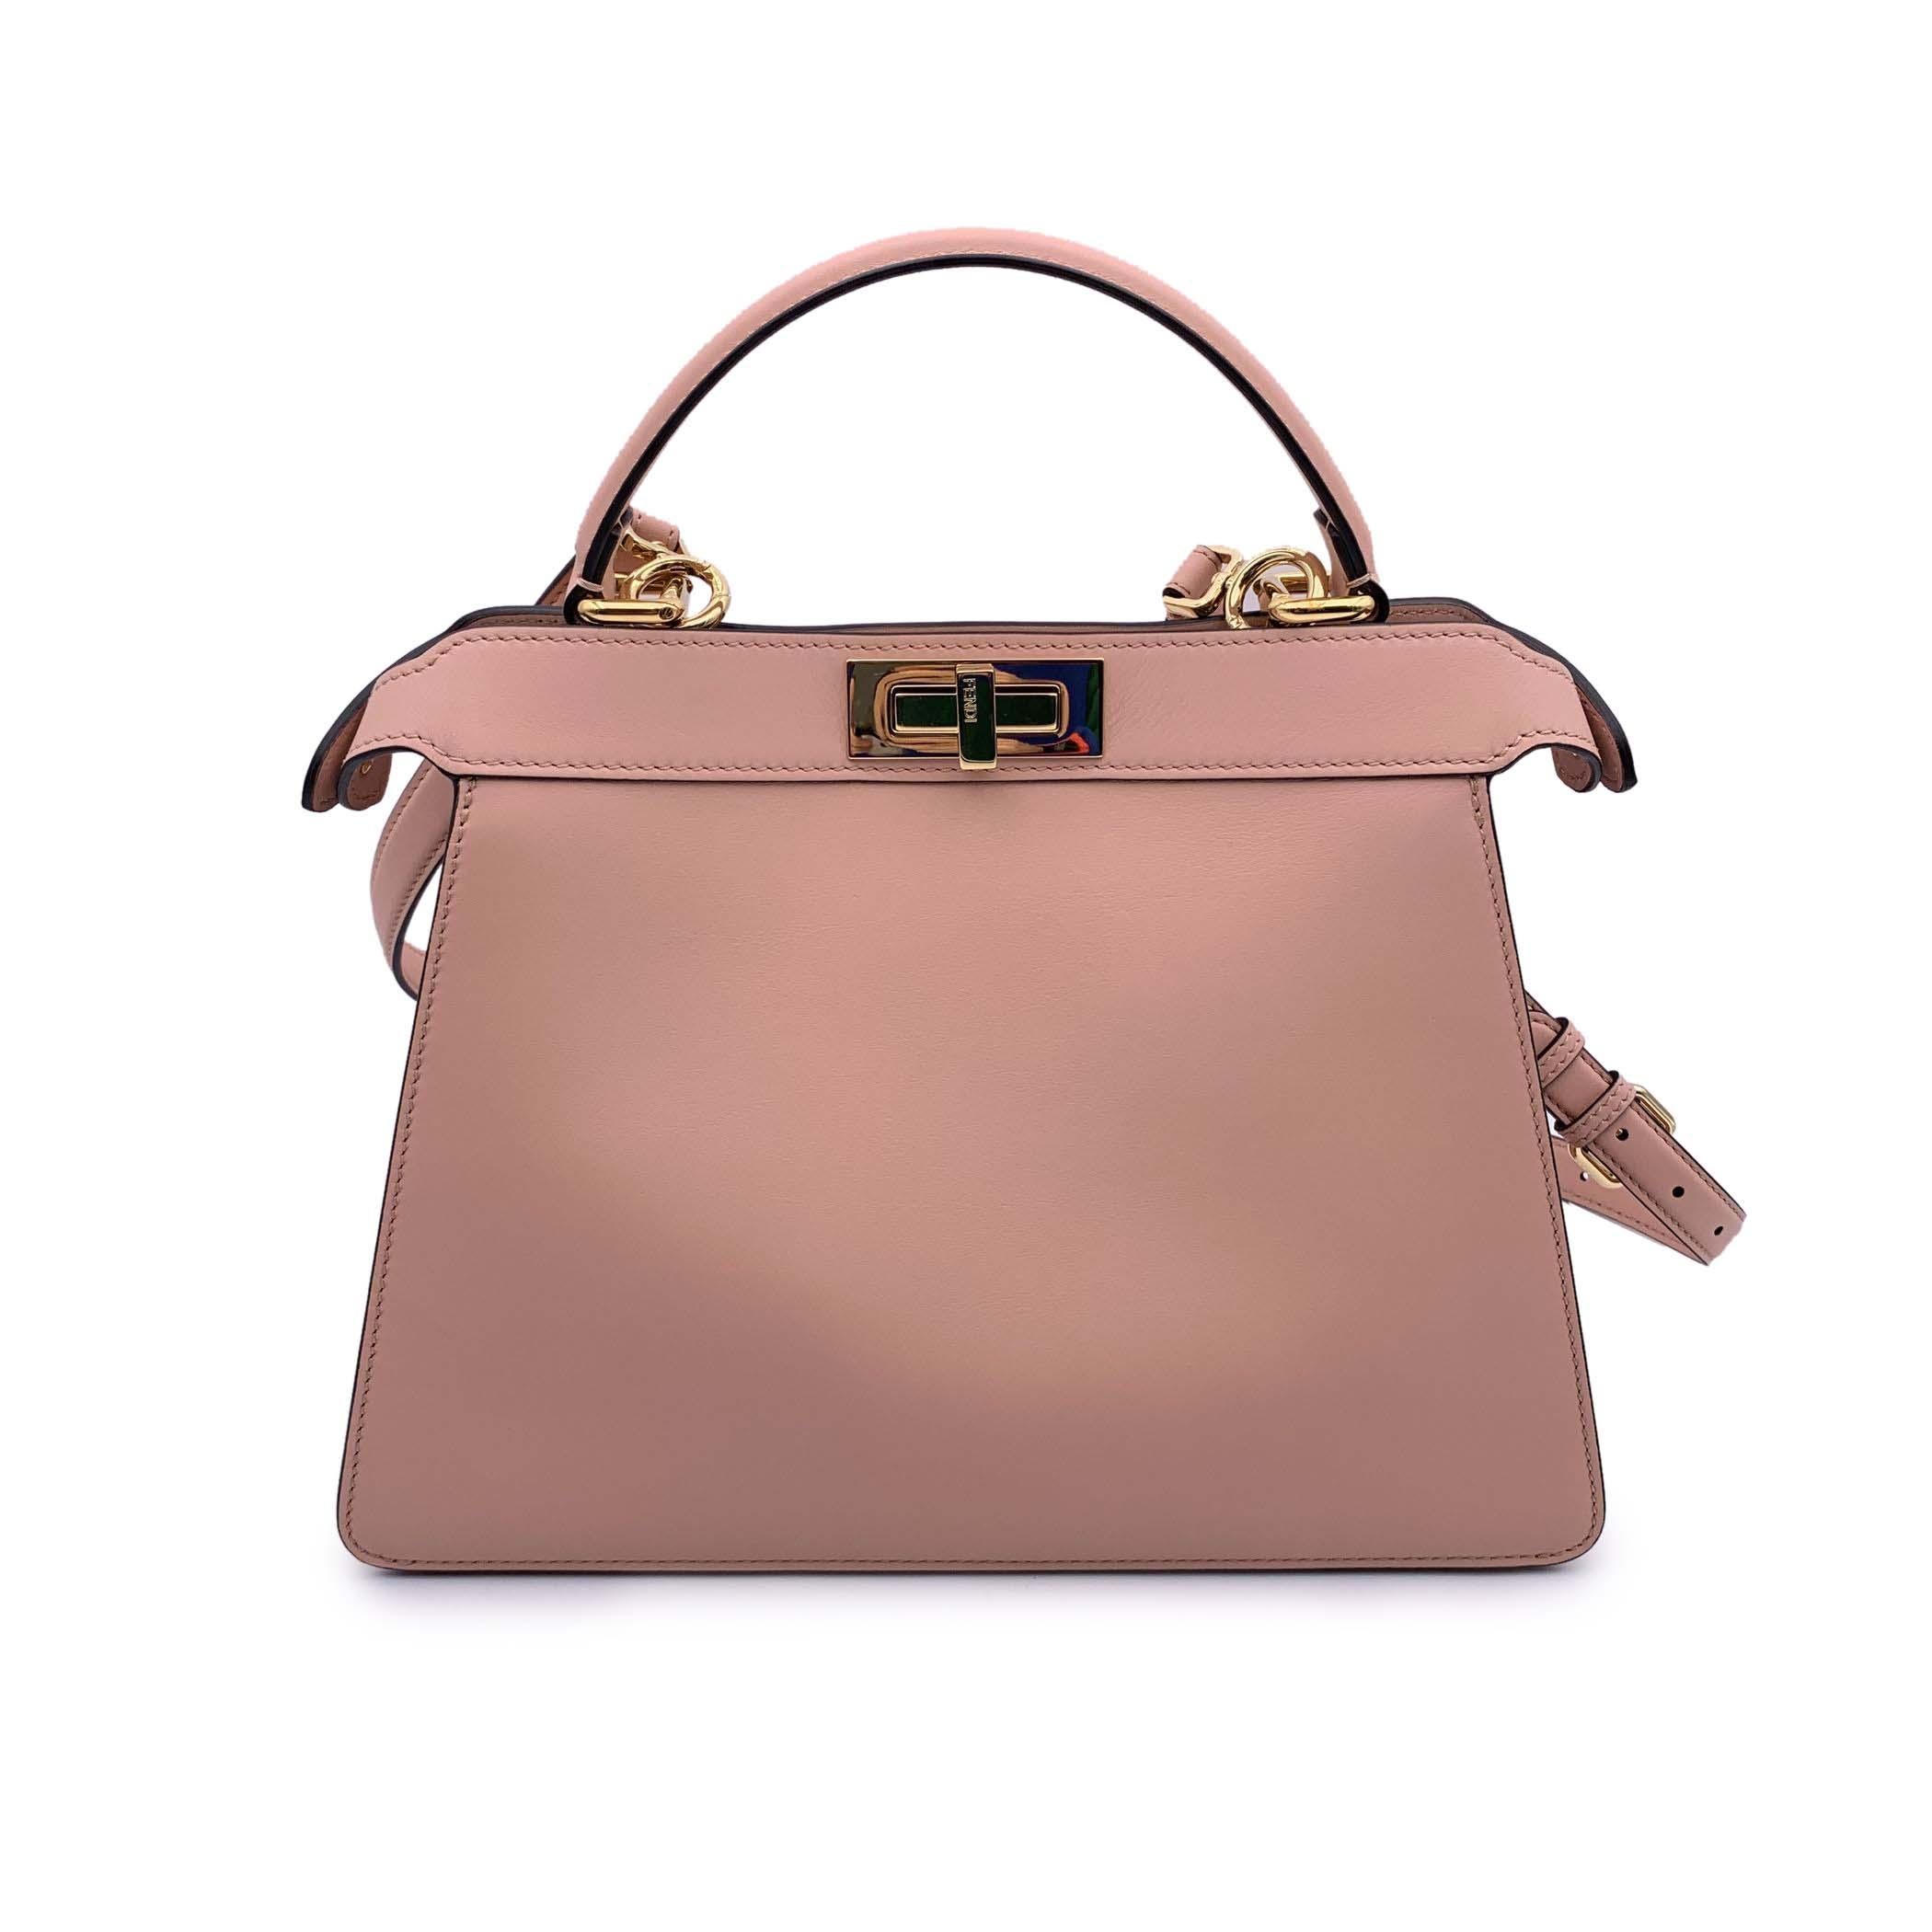 Fendi Pink Leather Peekaboo ISeeU Medium Top Handle Satchel In Excellent Condition For Sale In Rome, Rome